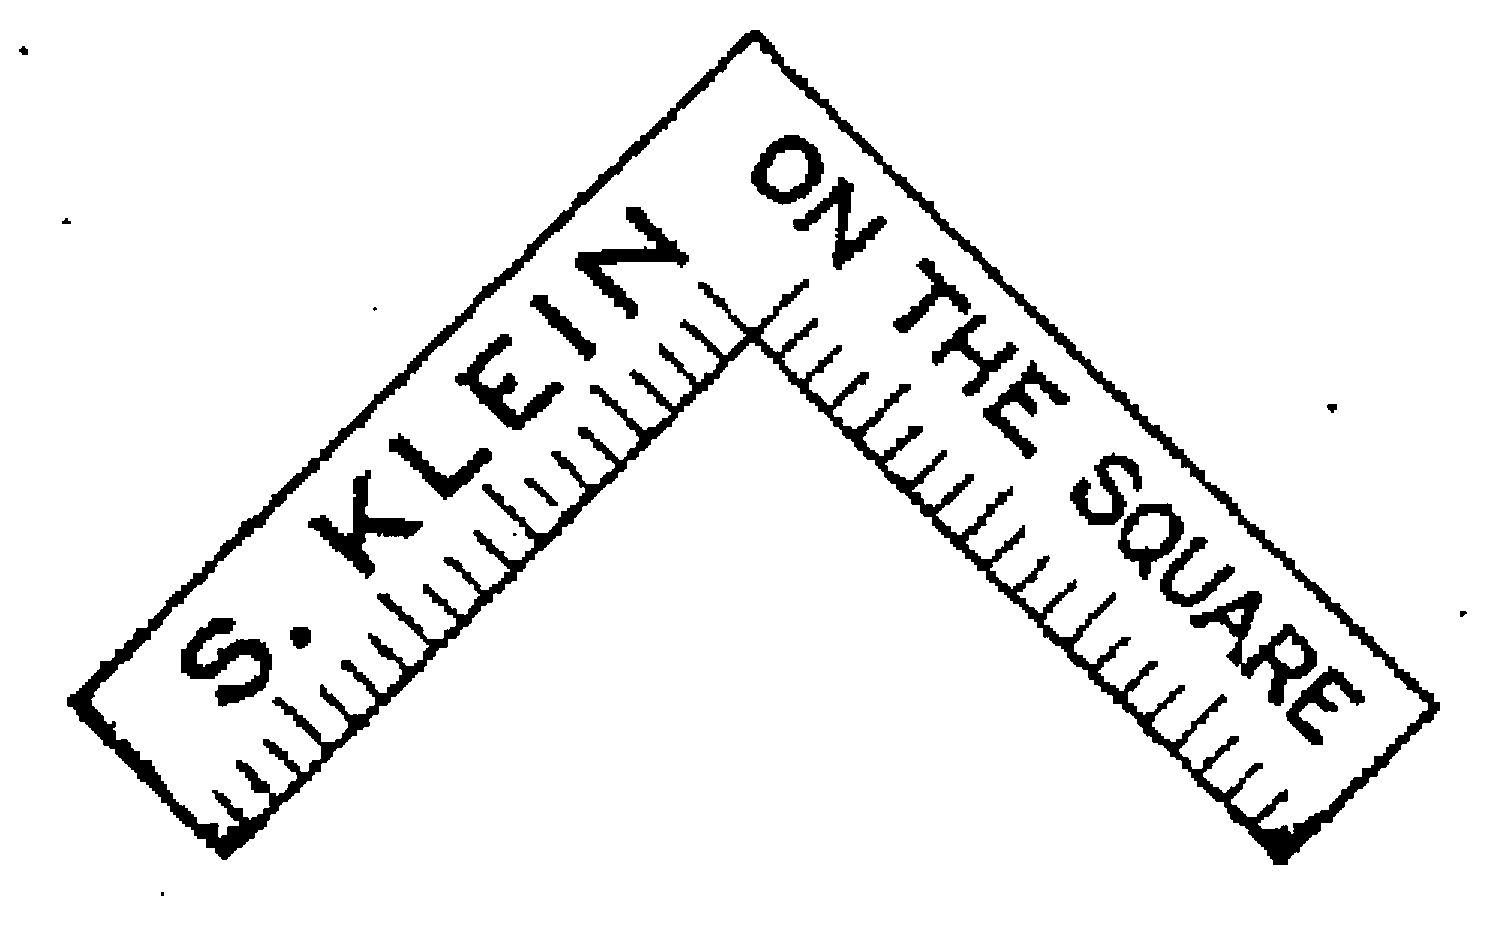  S. KLEIN ON THE SQUARE